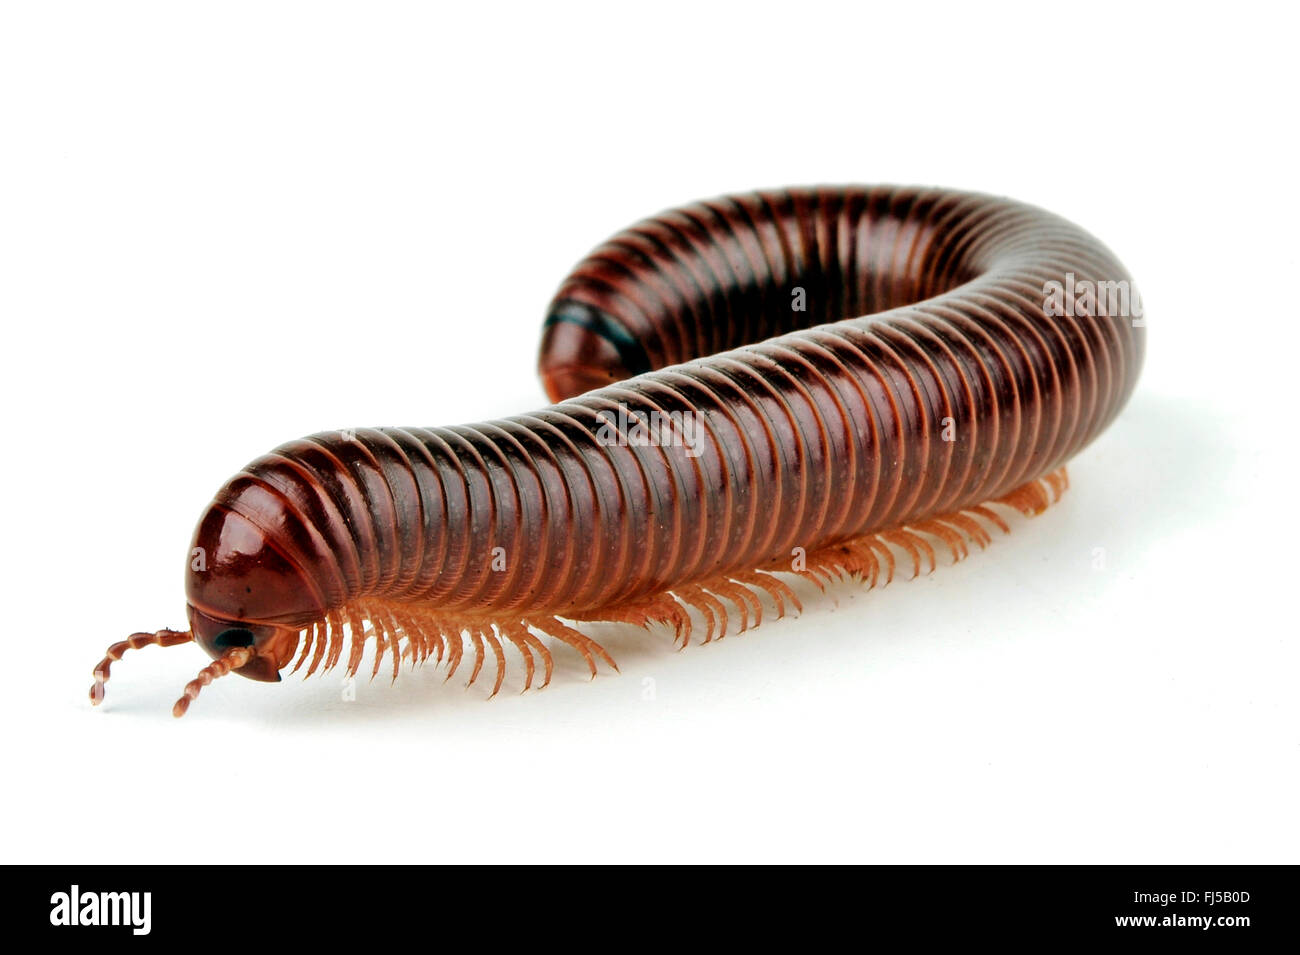 Giant chocolate, Chocolate millipede (Ophistreptus guineensis), cut-out Stock Photo